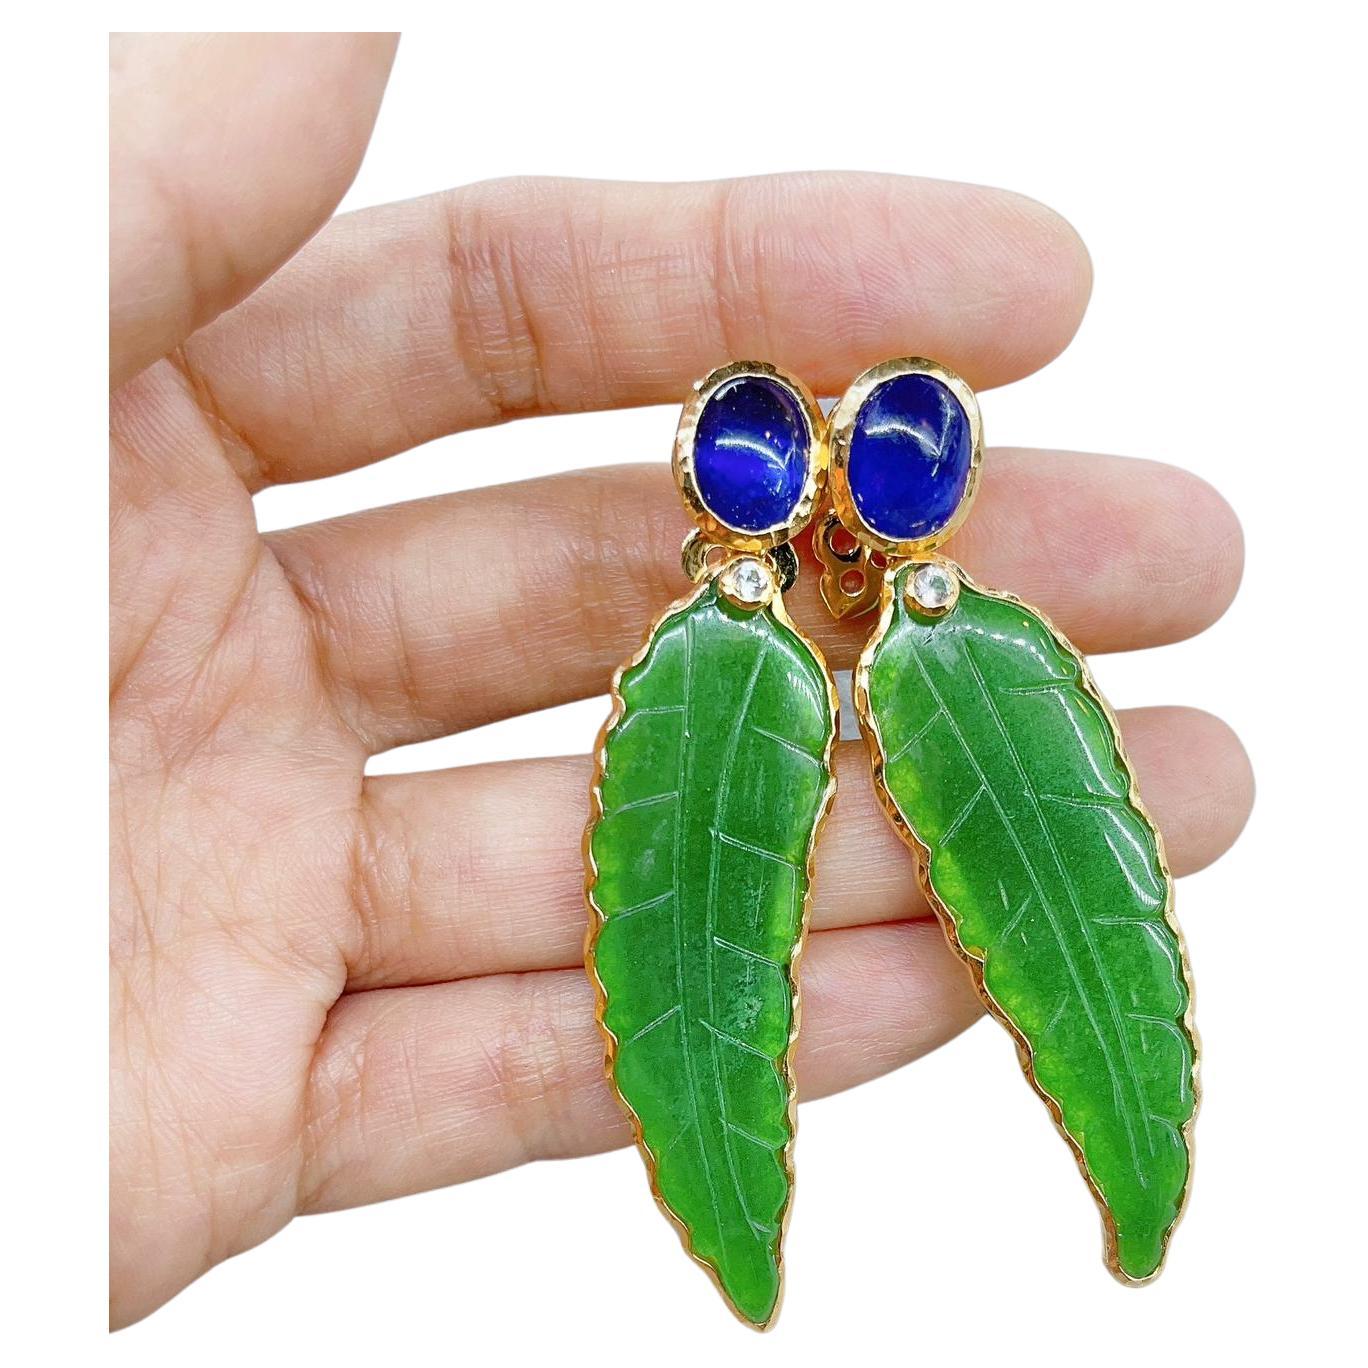 Bochic “Orient” Multi Gem Earrings 
Natural Sapphire, Colors - Blue - 7 Carats 
Shape - Cabochon
Natural White Topaz - 0.25 Carats 
Shape round brilliant 
Carved Green Jade 
Set in 22K Gold and Silver  
Posts and clip ons 
The Earrings are one of a